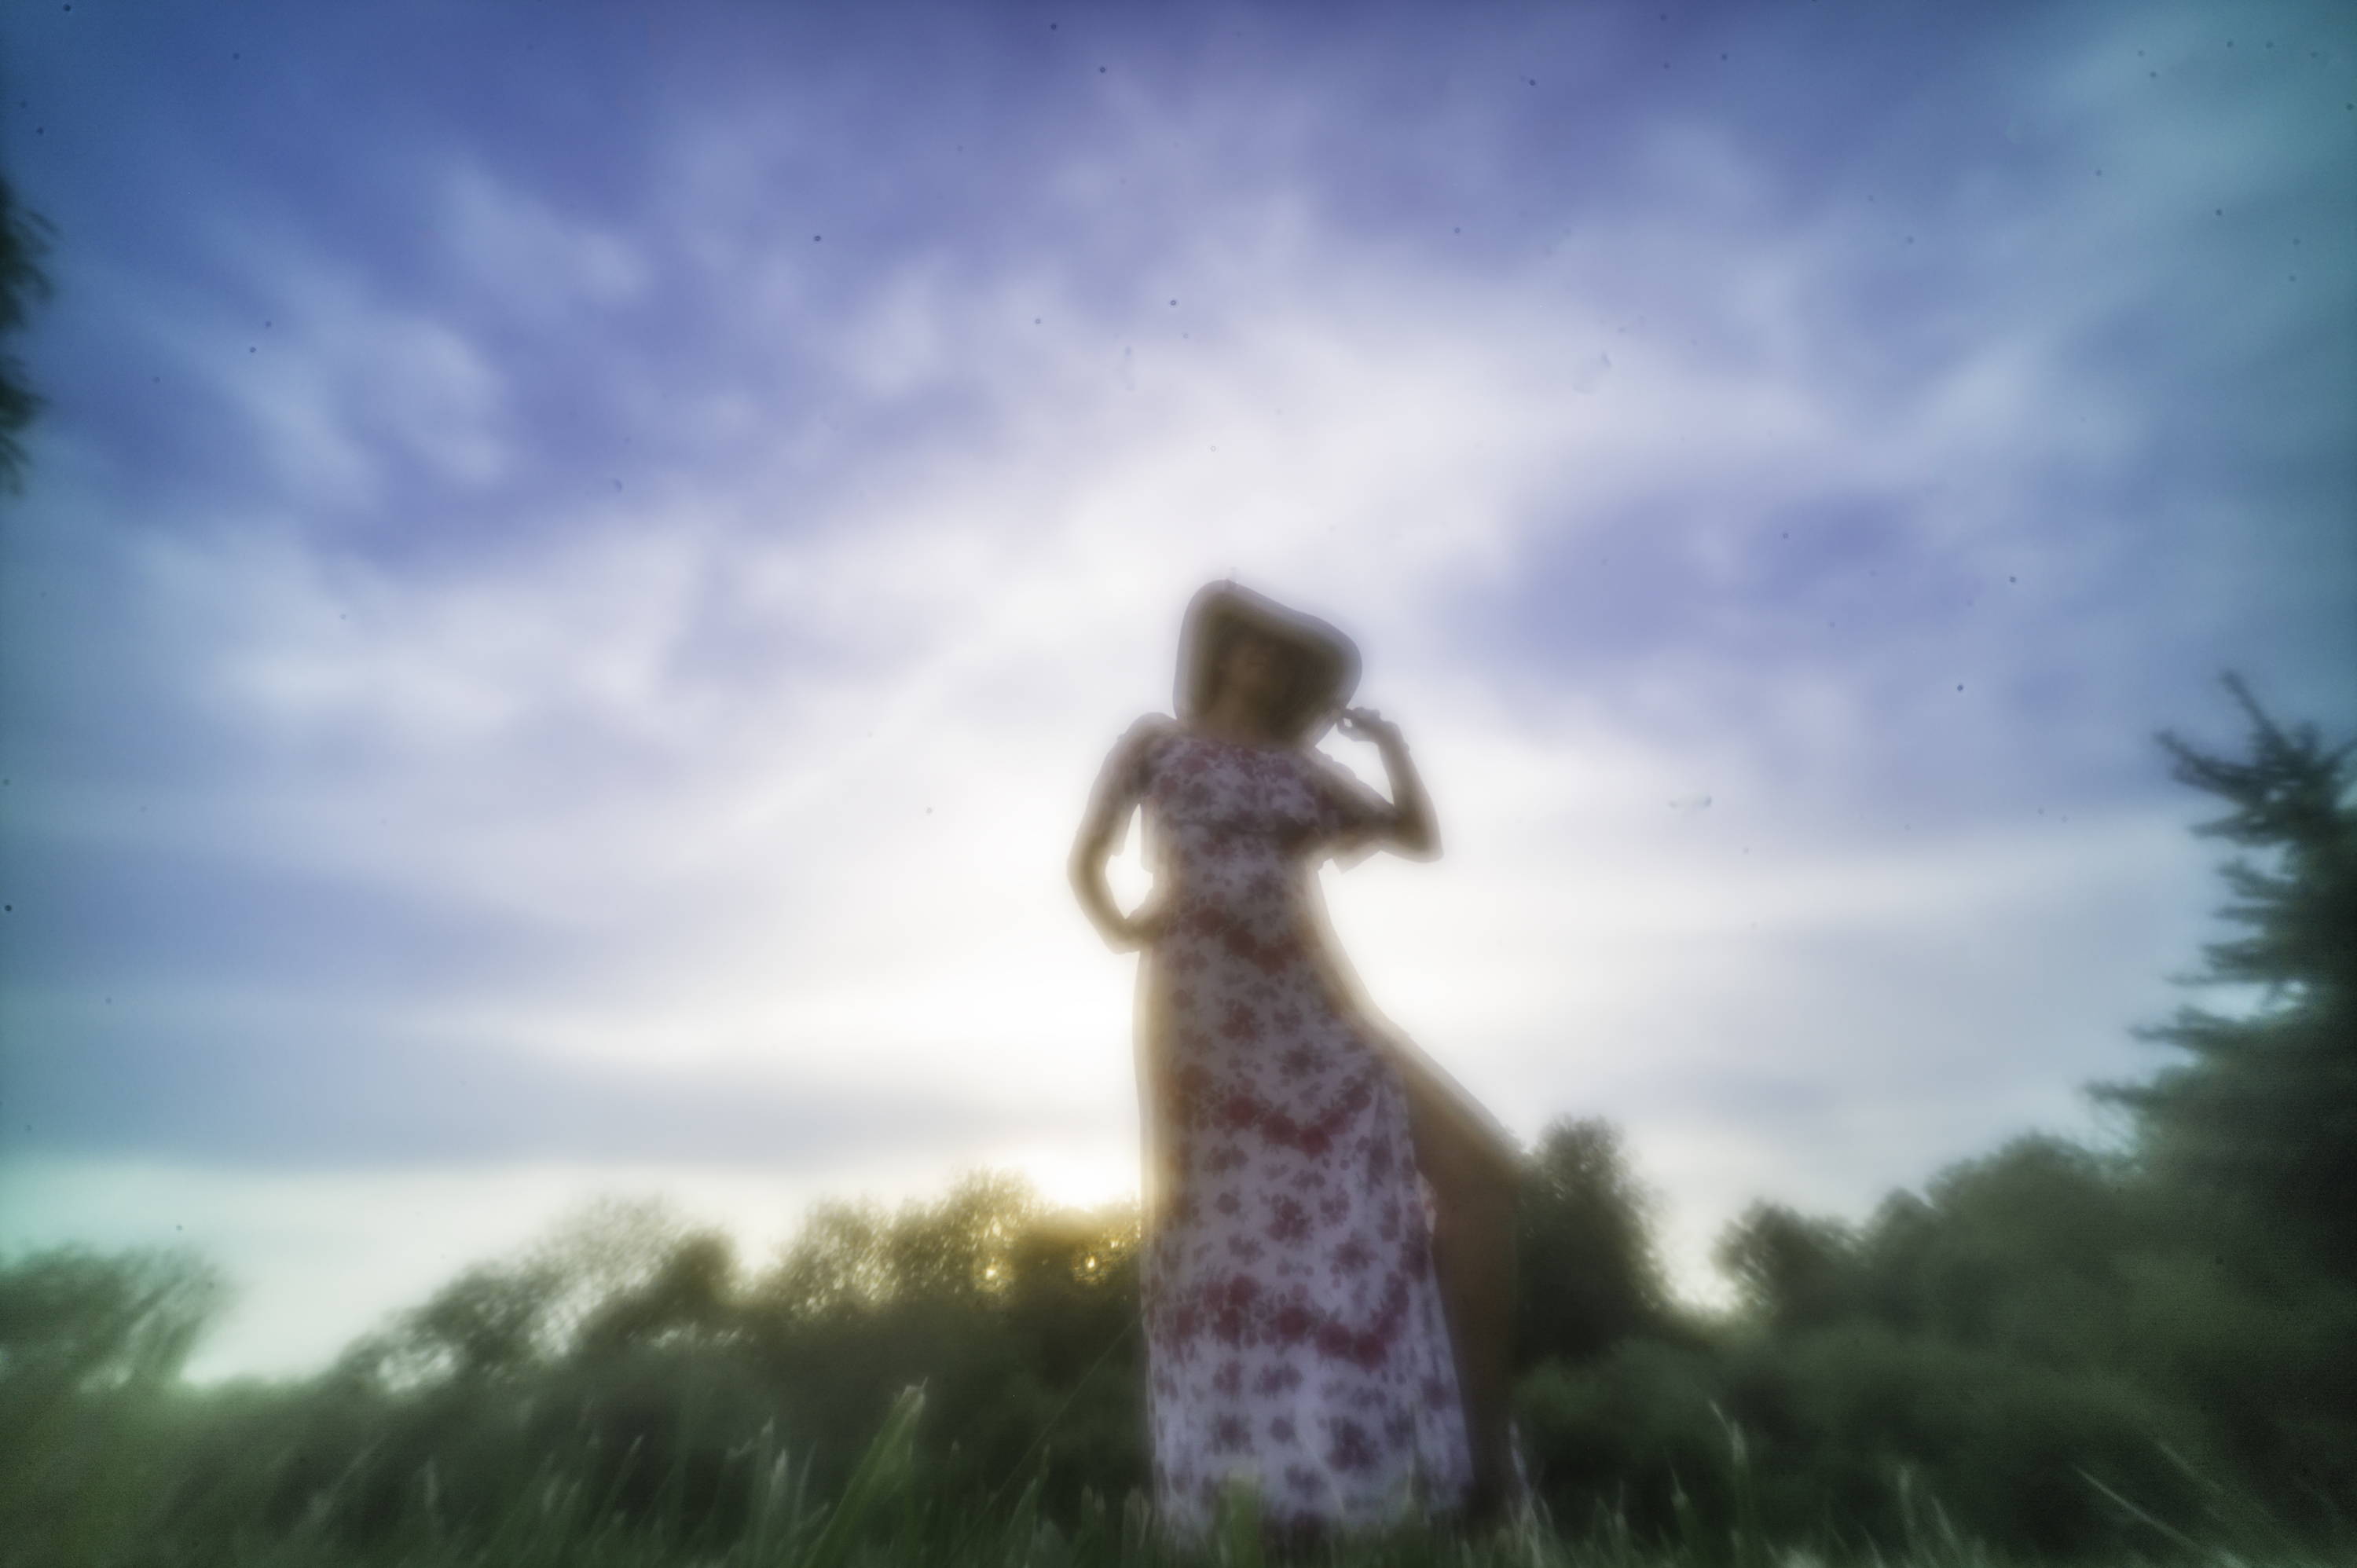 Creative Self-Portraits with the Lensbaby Obscura